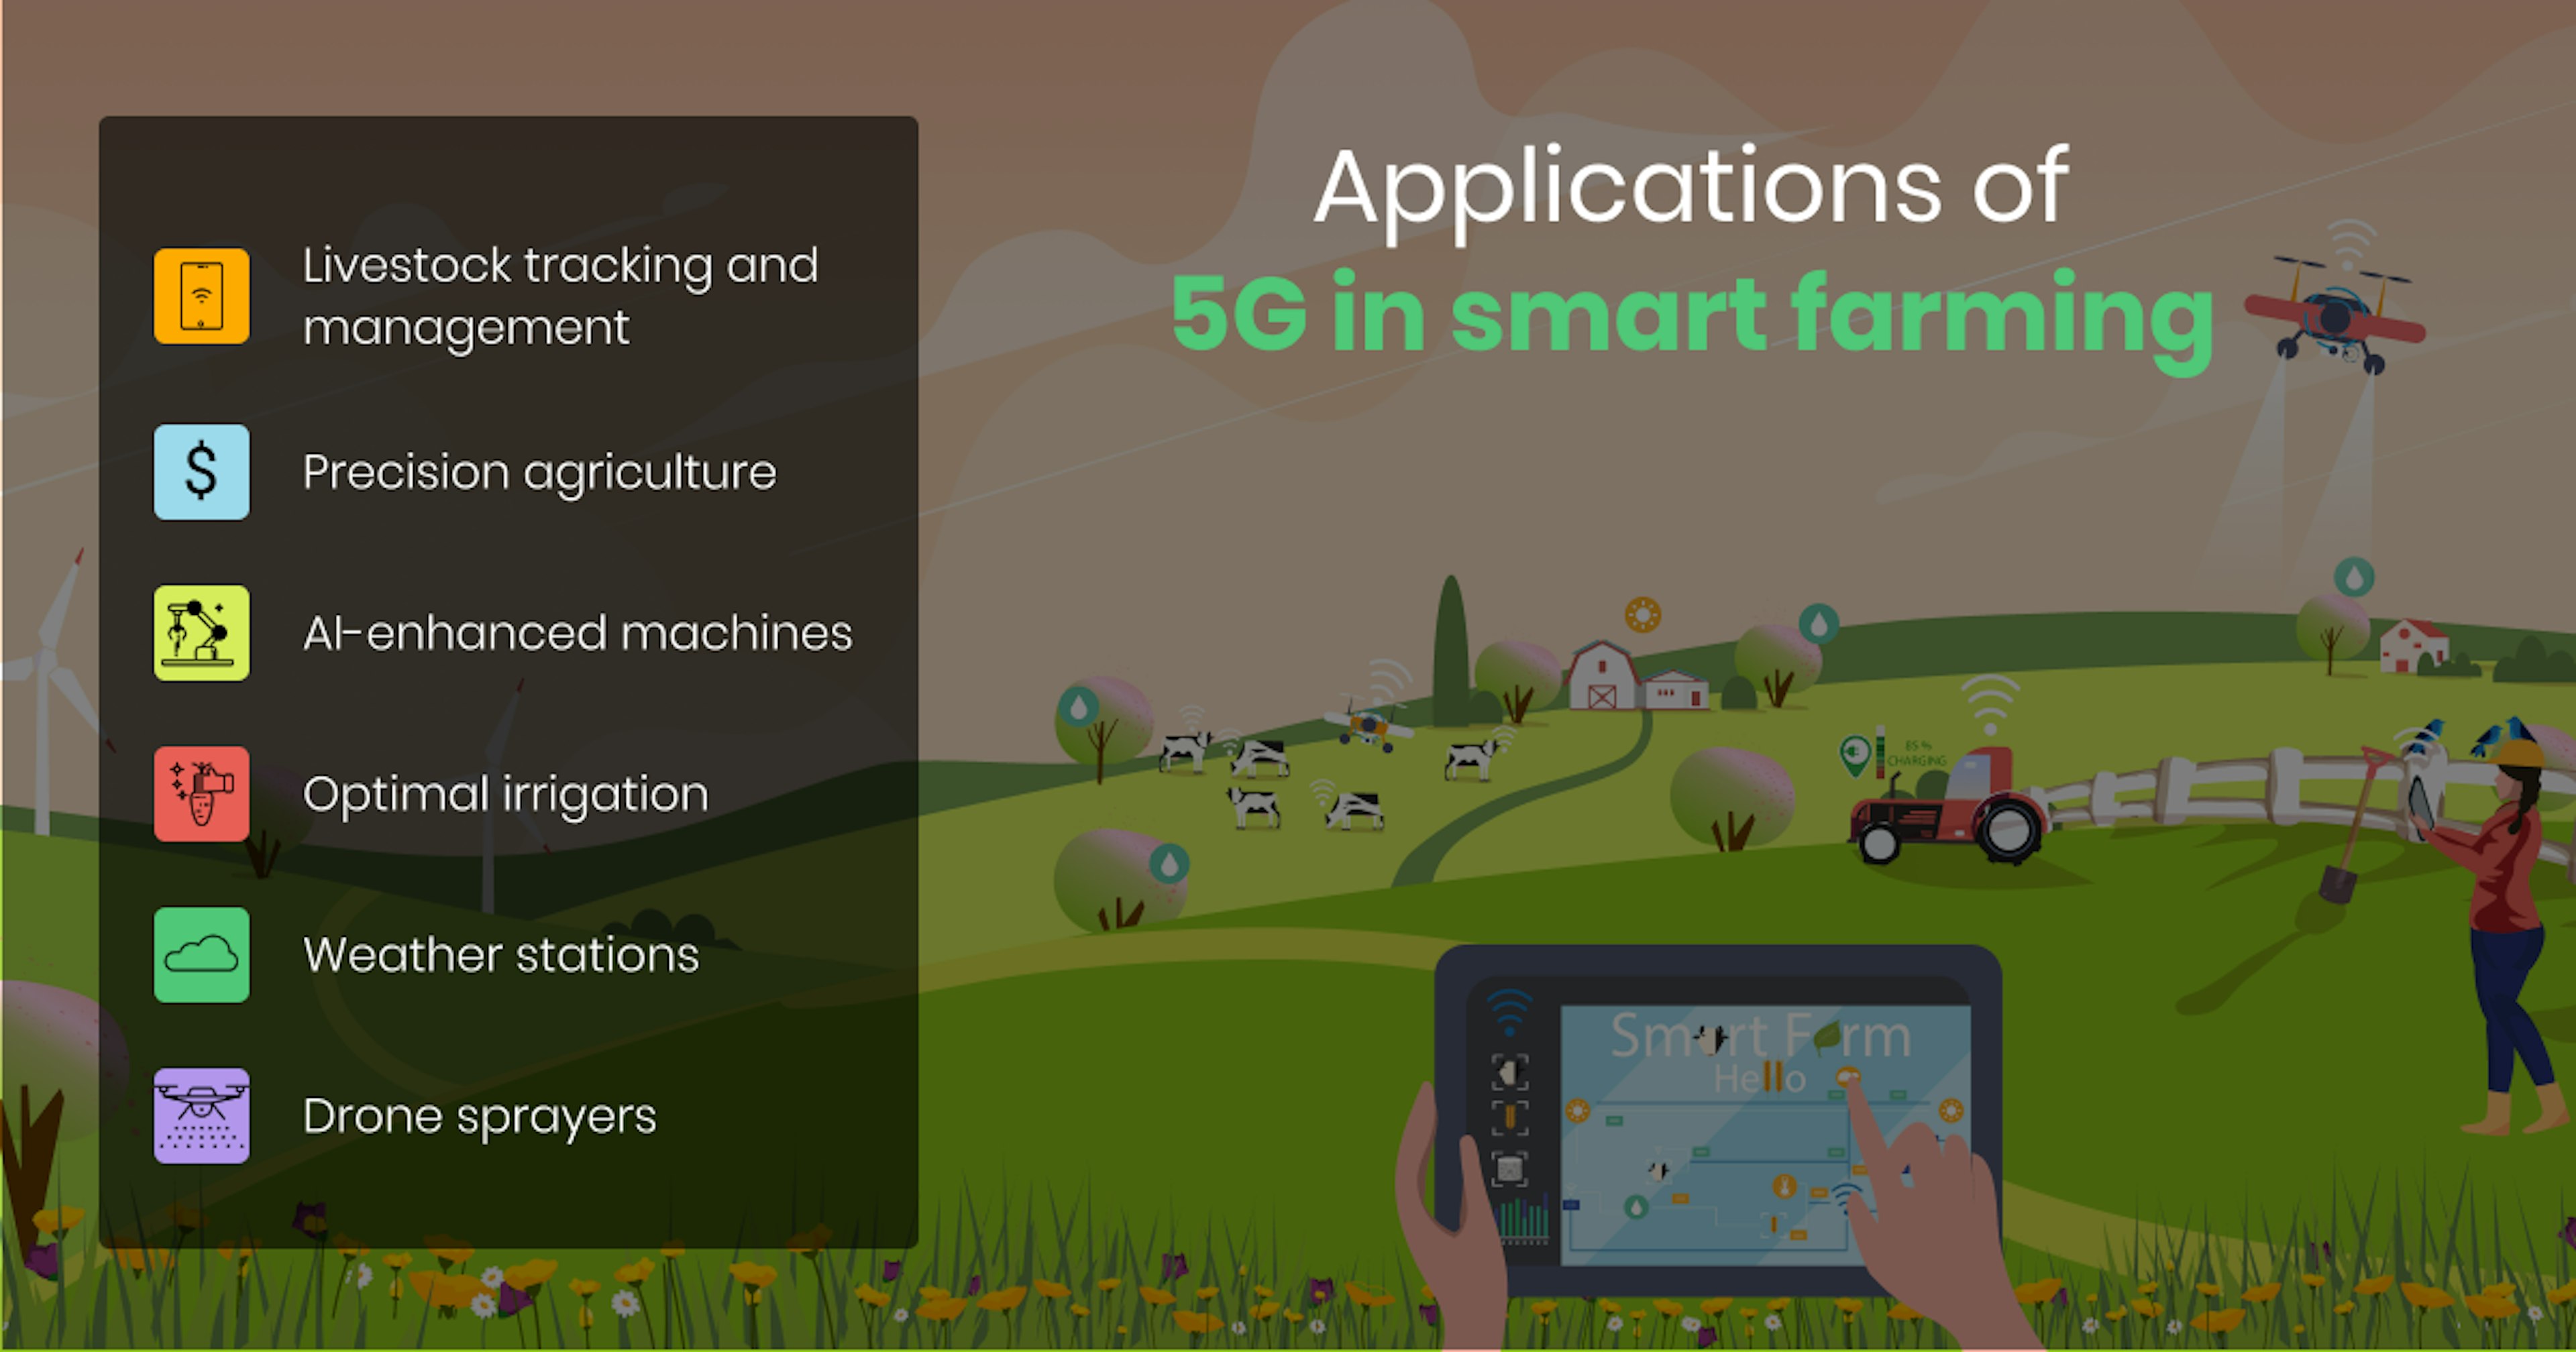 Applications of 5G in Smart Farming